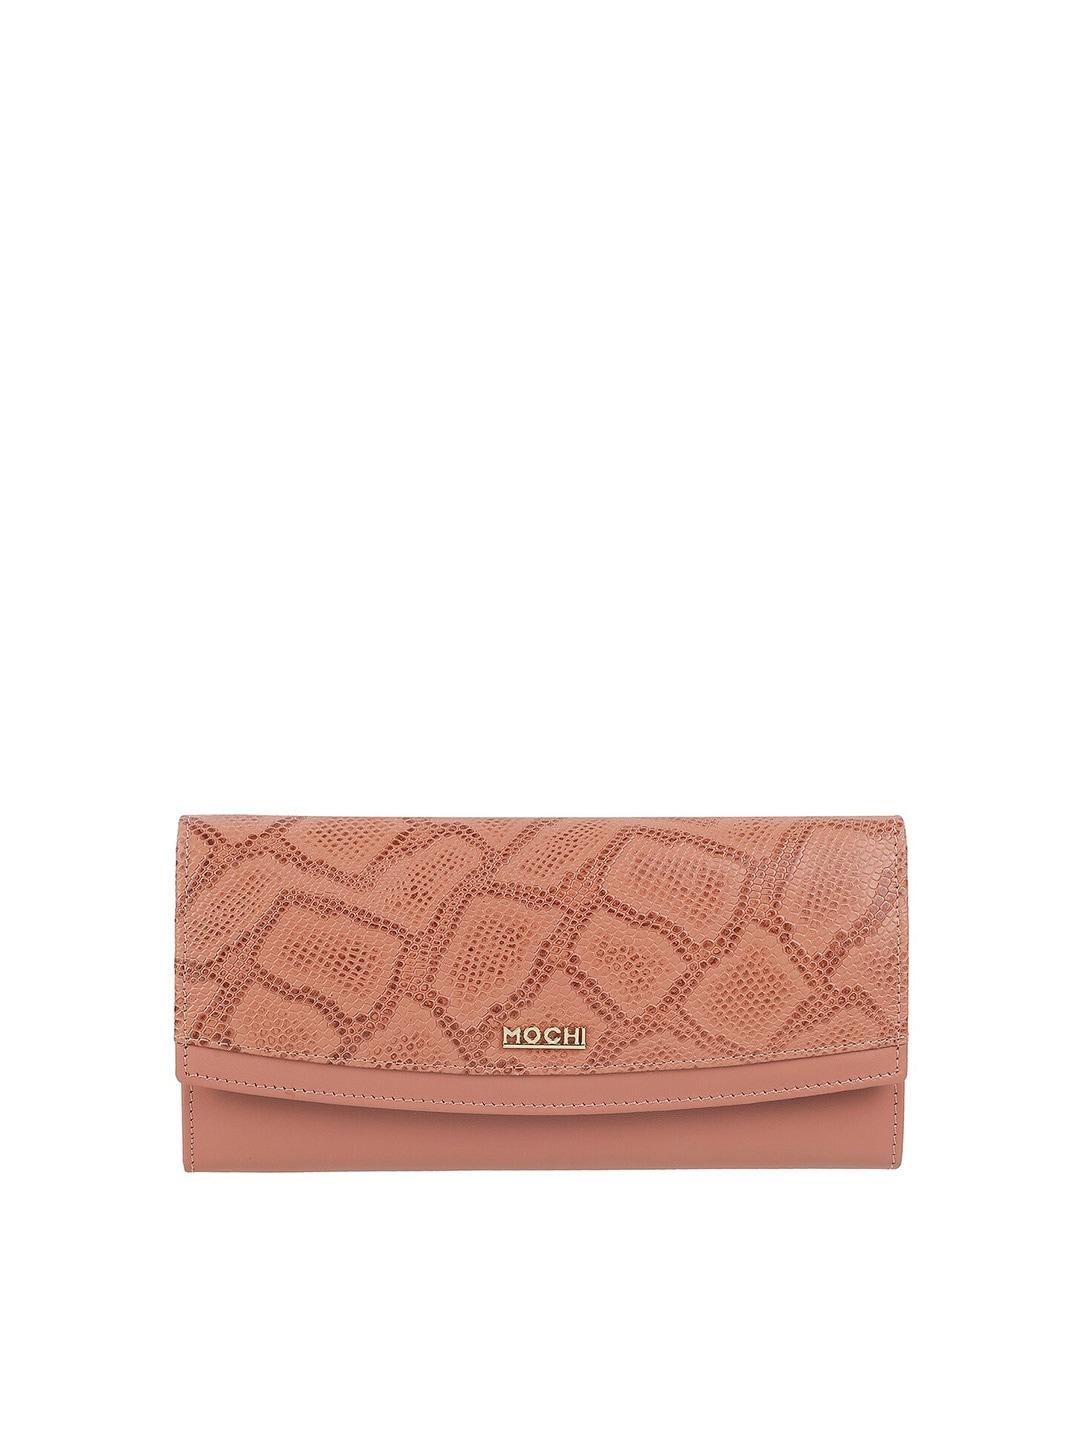 mochi-women-peach-coloured-textured-two-fold-wallet